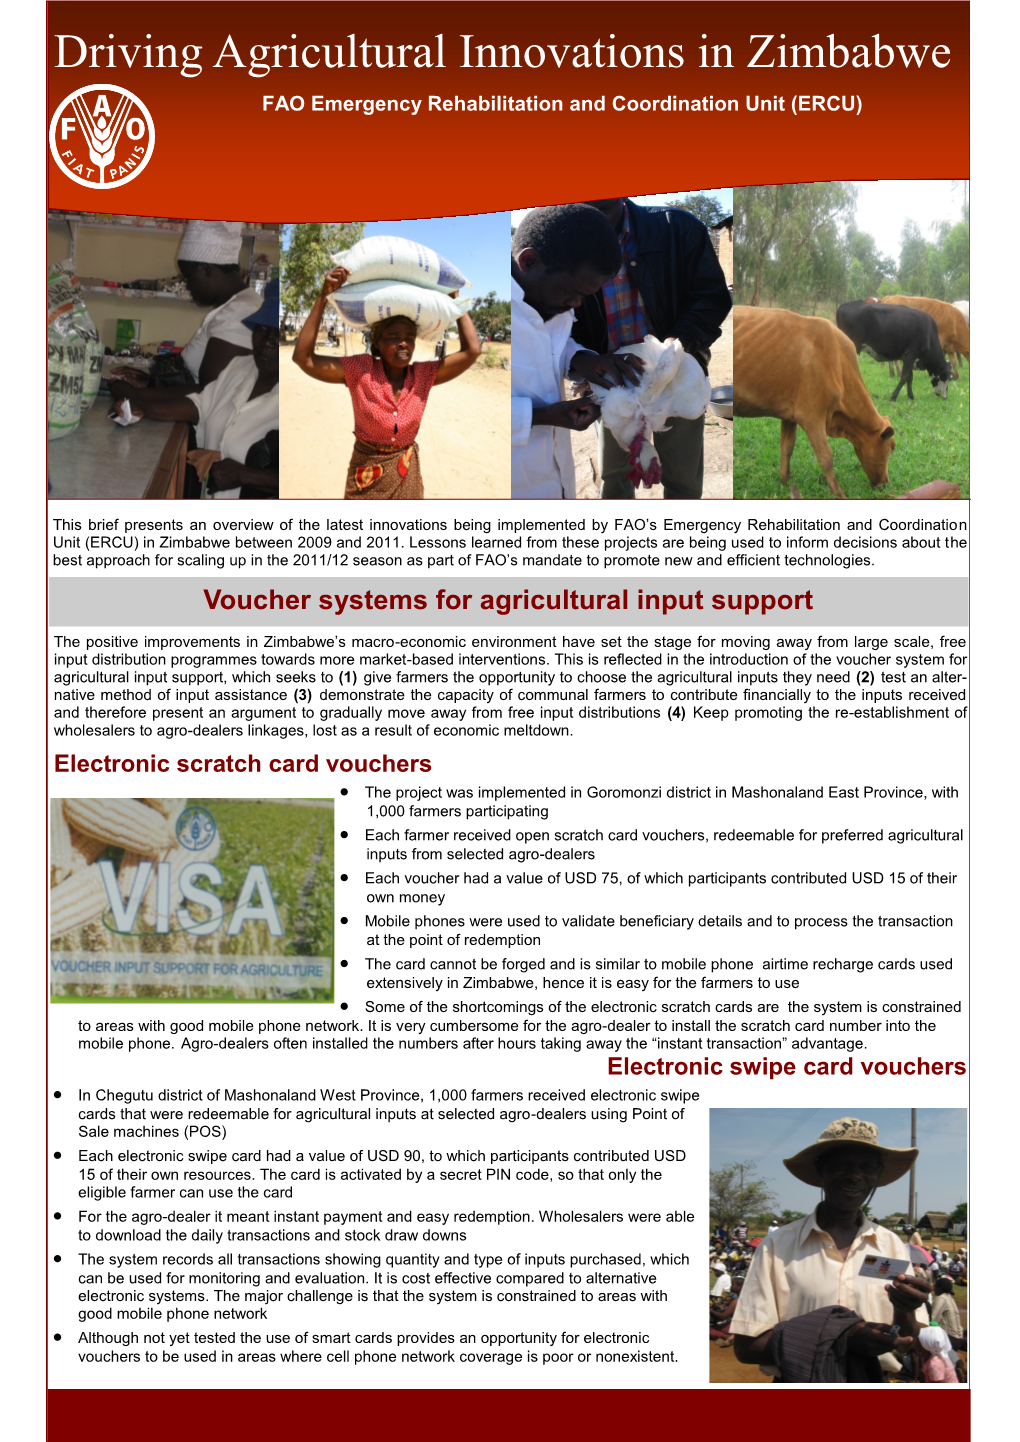 Driving Agricultural Innovations in Zimbabwe FAO Emergency Rehabilitation and Coordination Unit (ERCU)